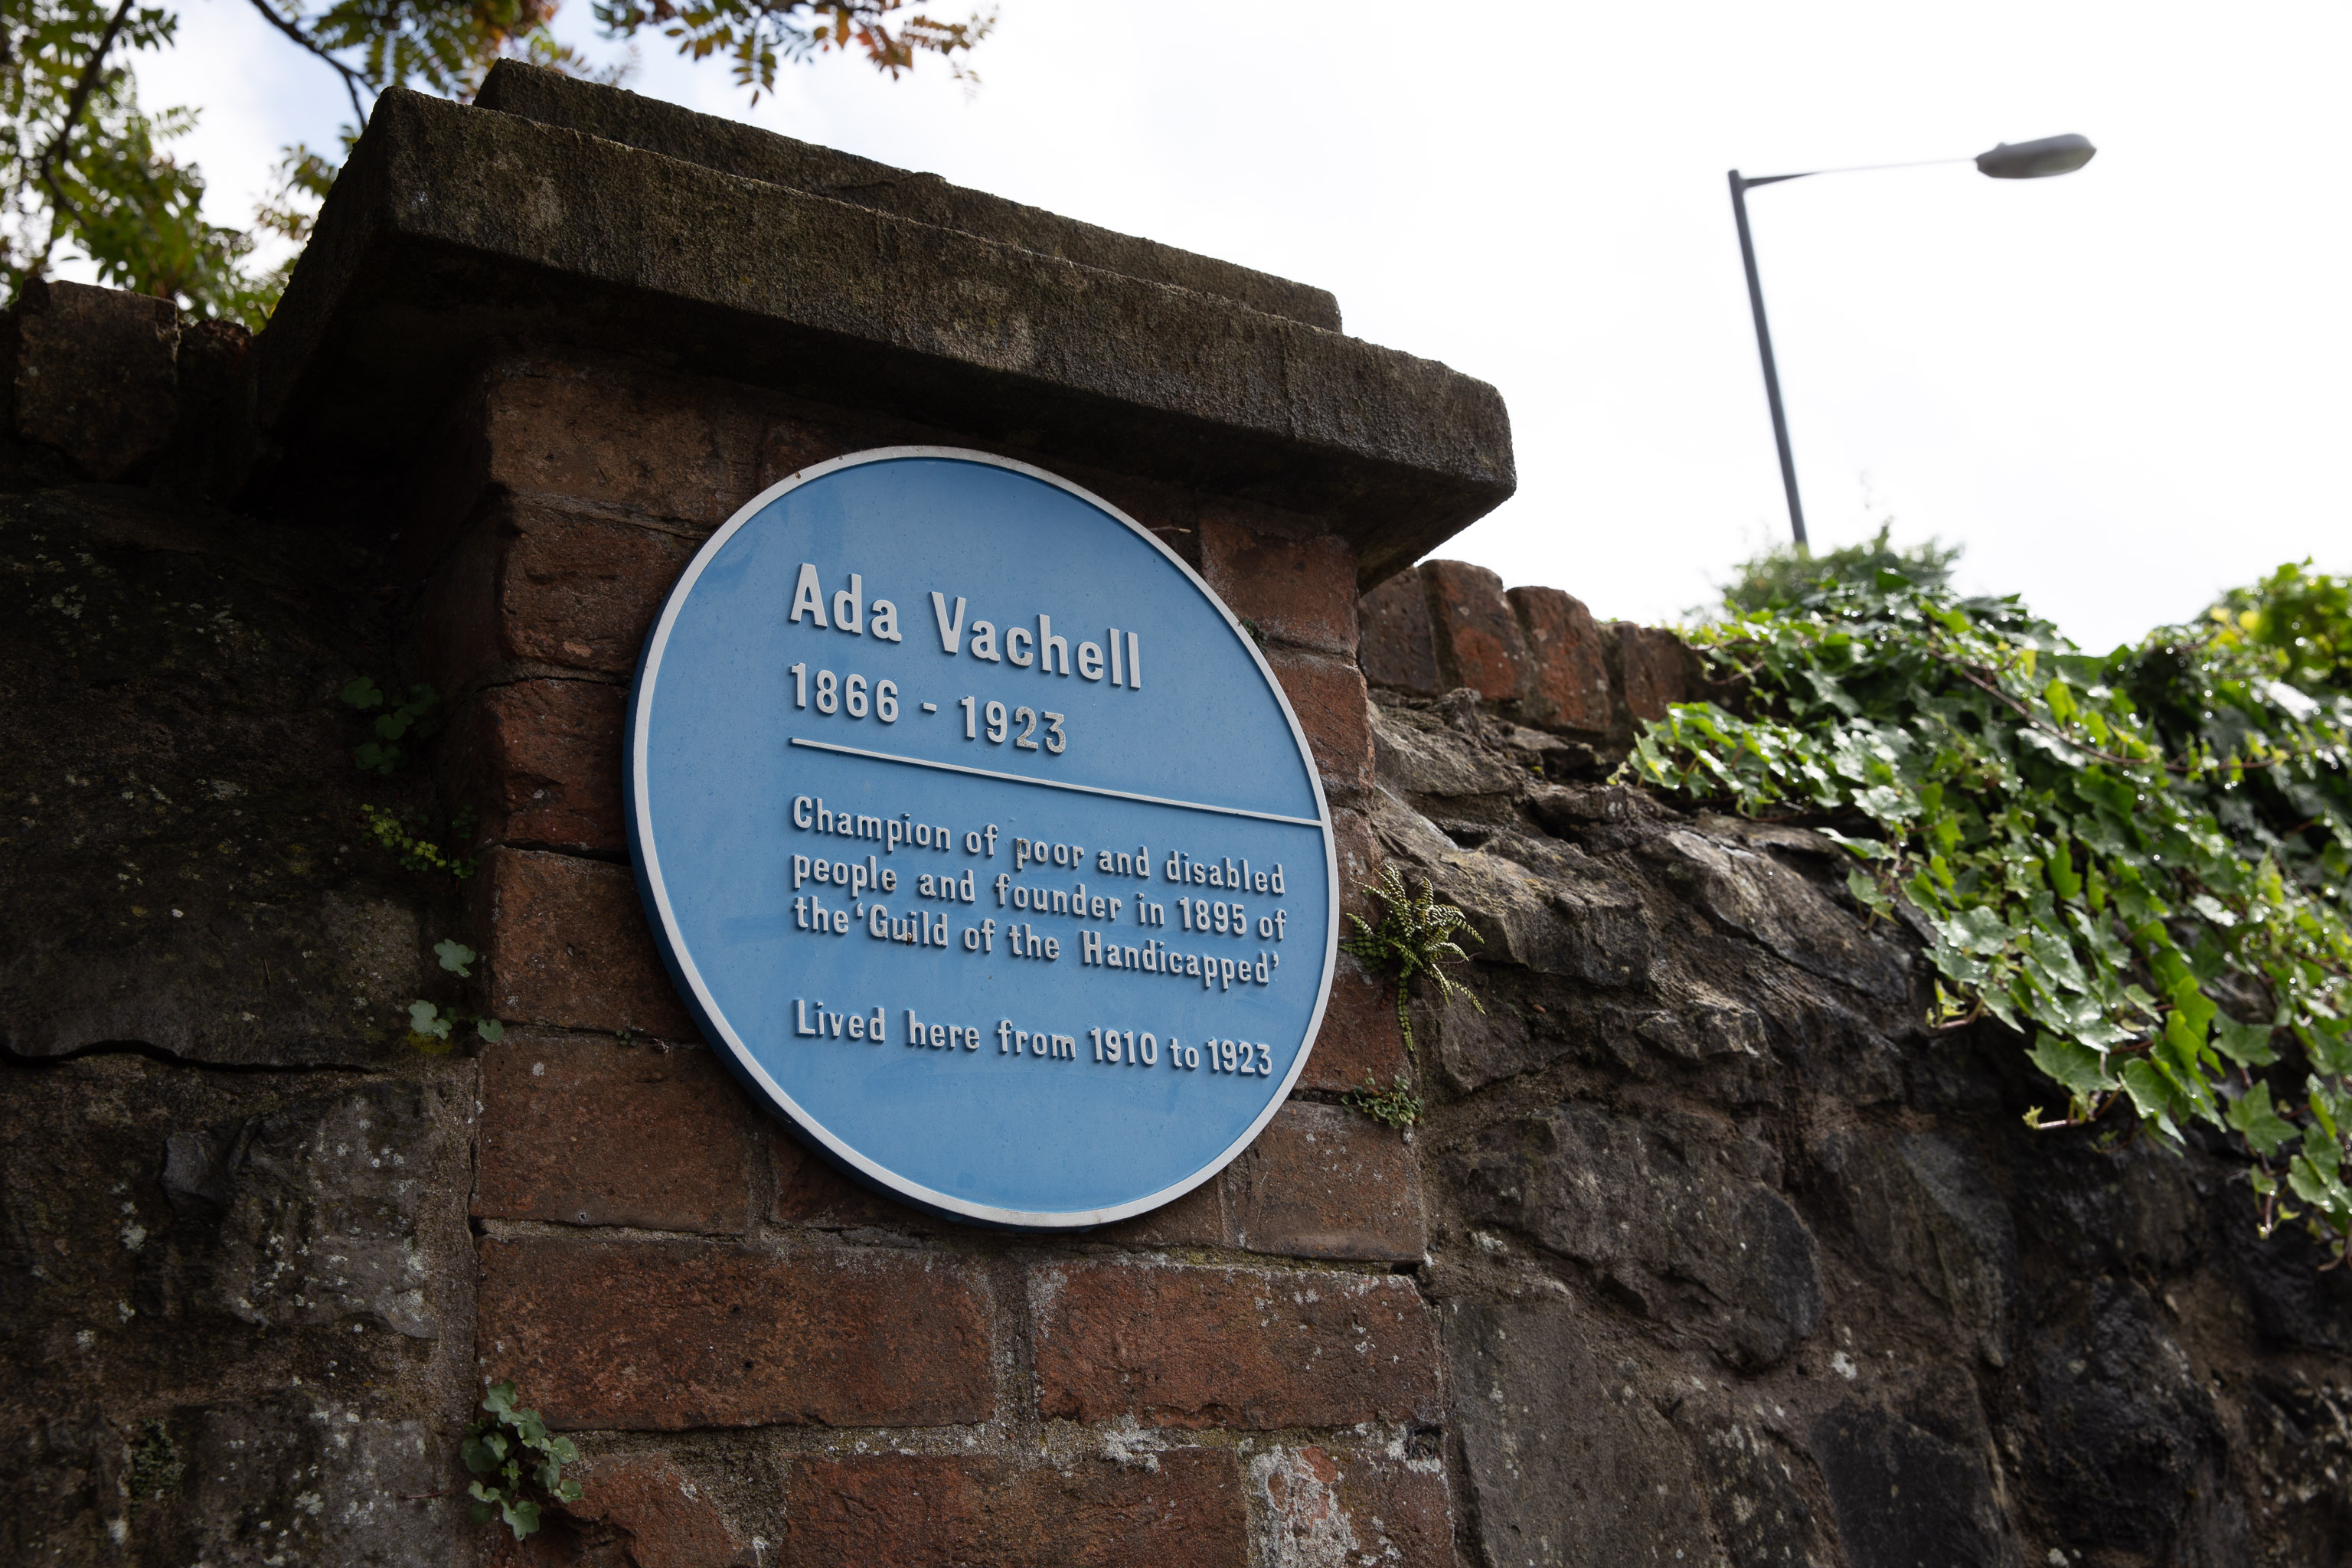 Ada Vachell
Can't resist a plaque. The original name of the organisation was "Guild of the Brave Poor Things", but that's Victorians for you.
